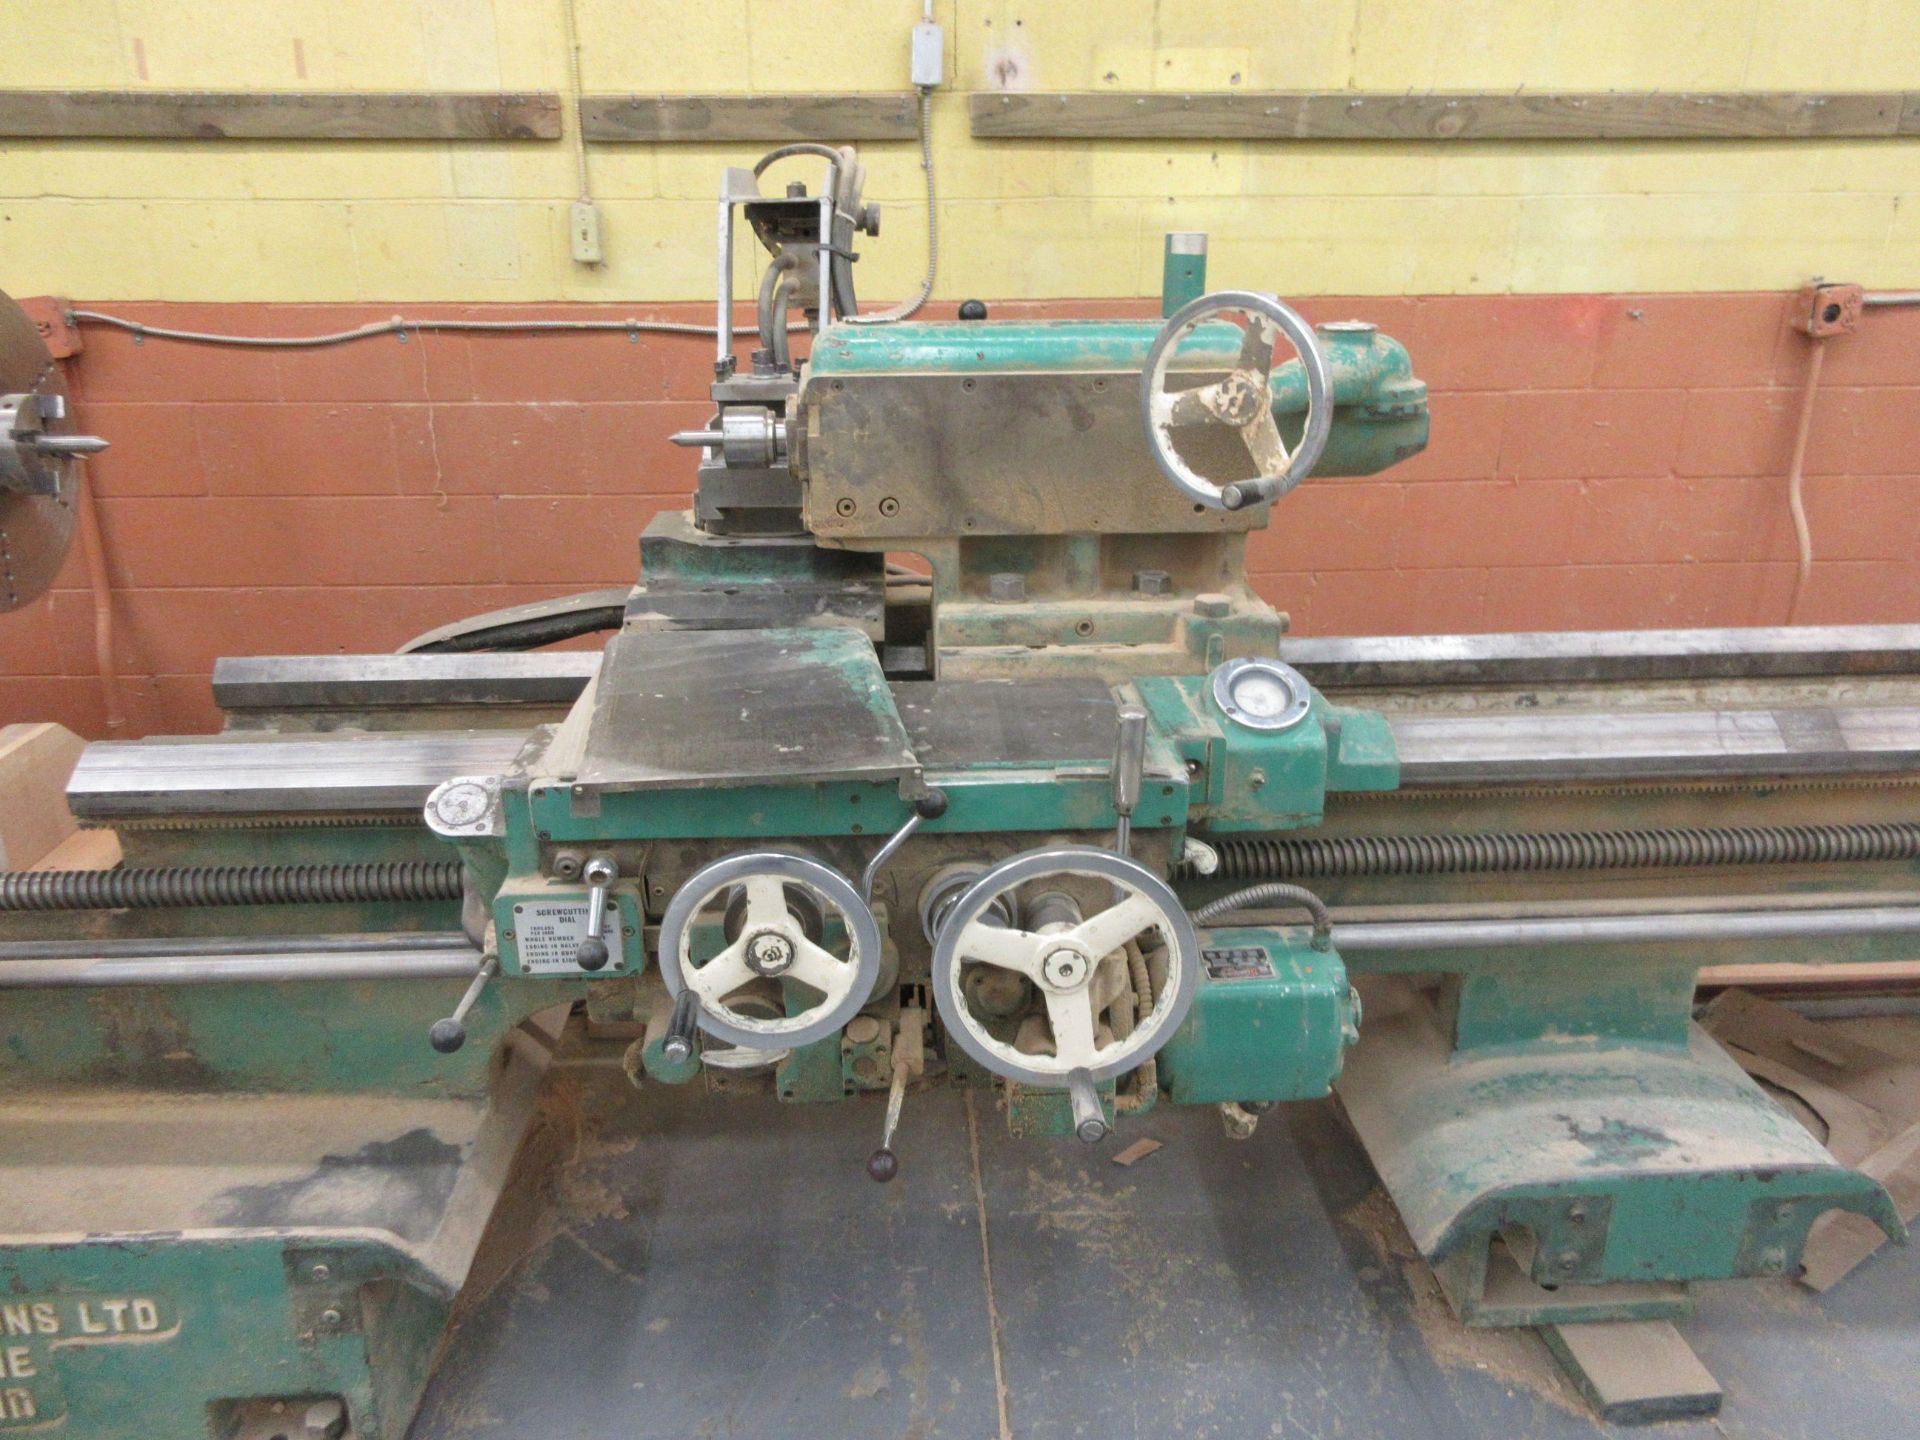 JOHN LANG & SONS, 20ft lathe, Mod: 10B2, 600 volts (SUBJECT TO BANK APPROVAL) - Image 7 of 8